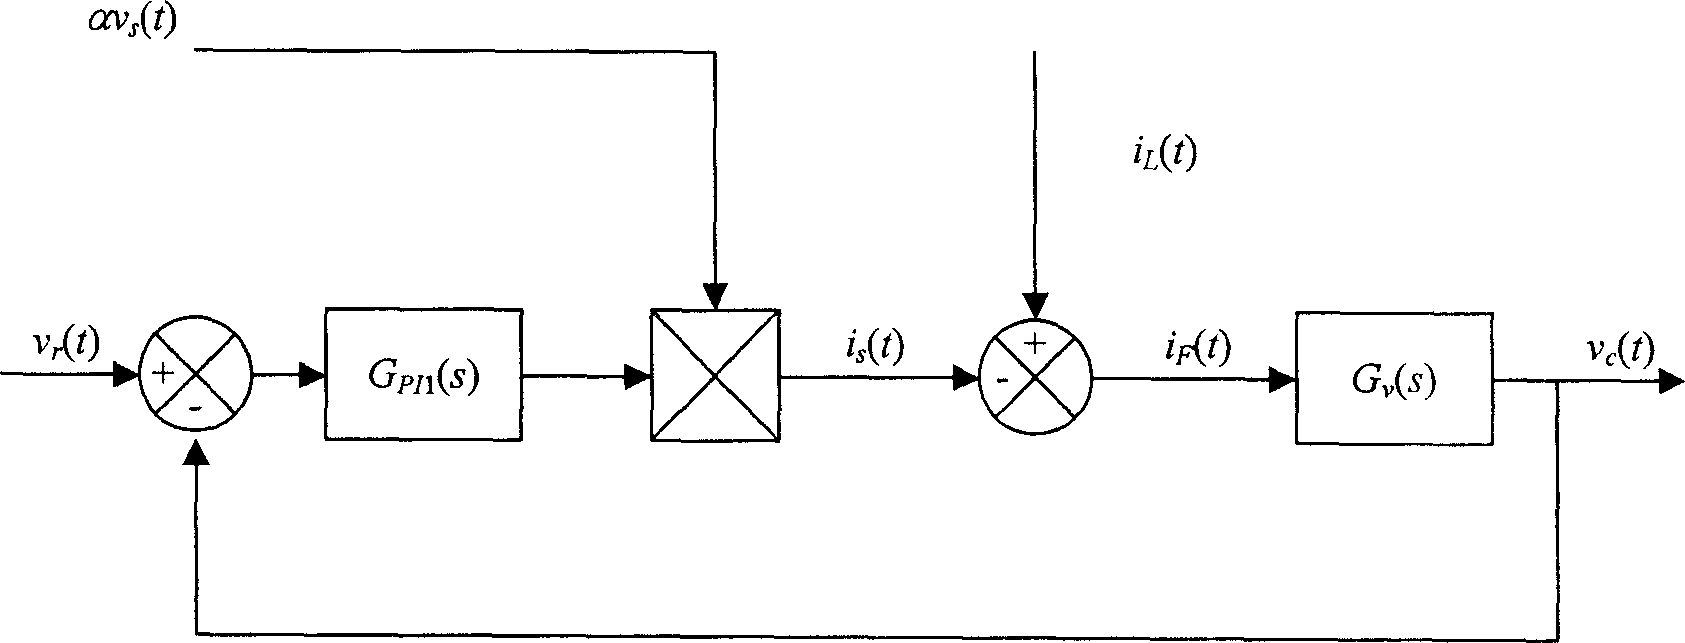 Single-phase active electric-power filter using analog cascade connection controller